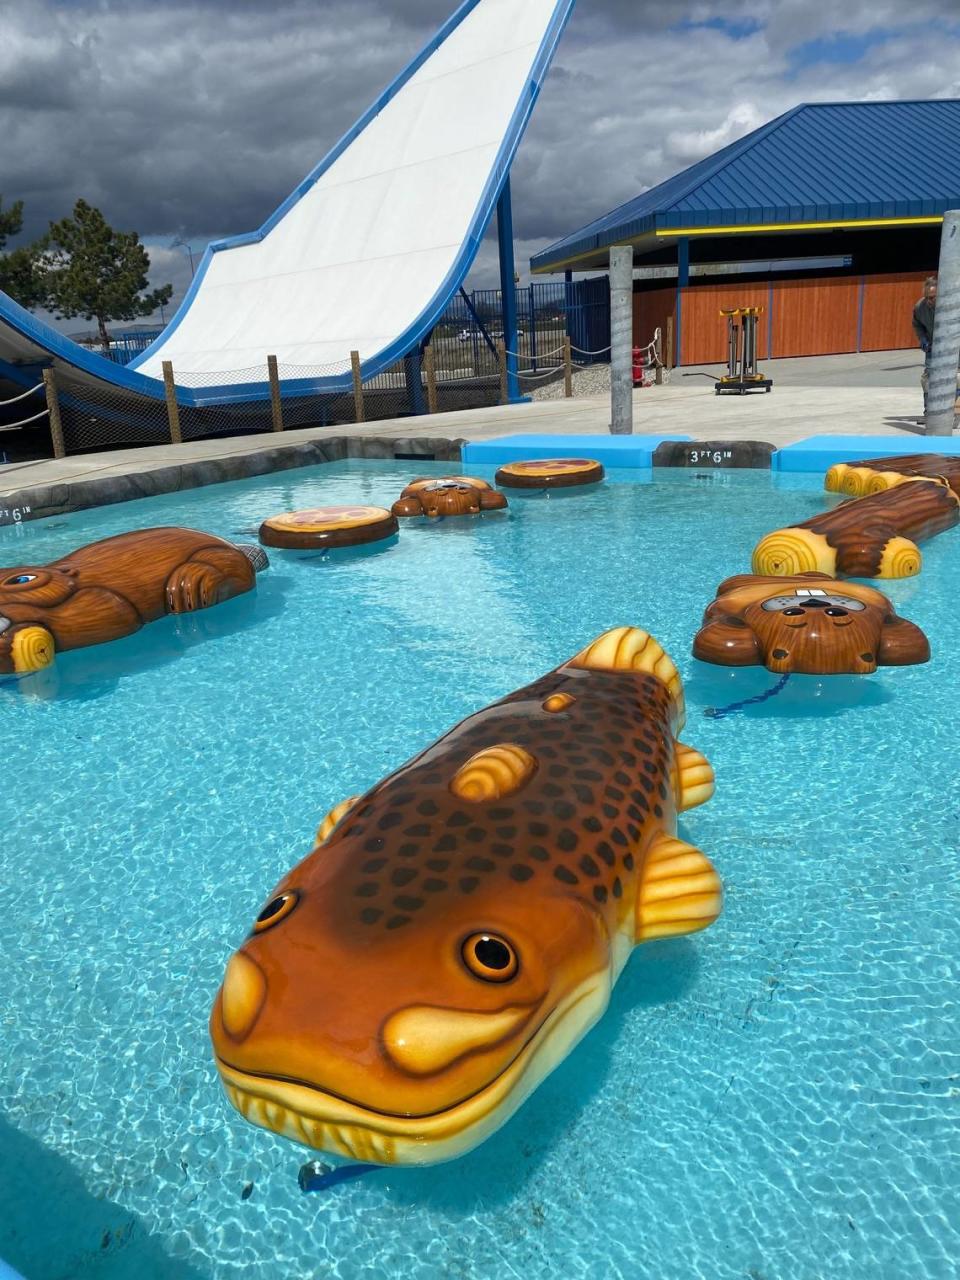 Critter Crossing, one of three new attractions at Roaring Springs Water Park, features fish, log and beaver-themed floats that guests can cross using overhead ropes. The expansion will open May 31. Courtesy photo